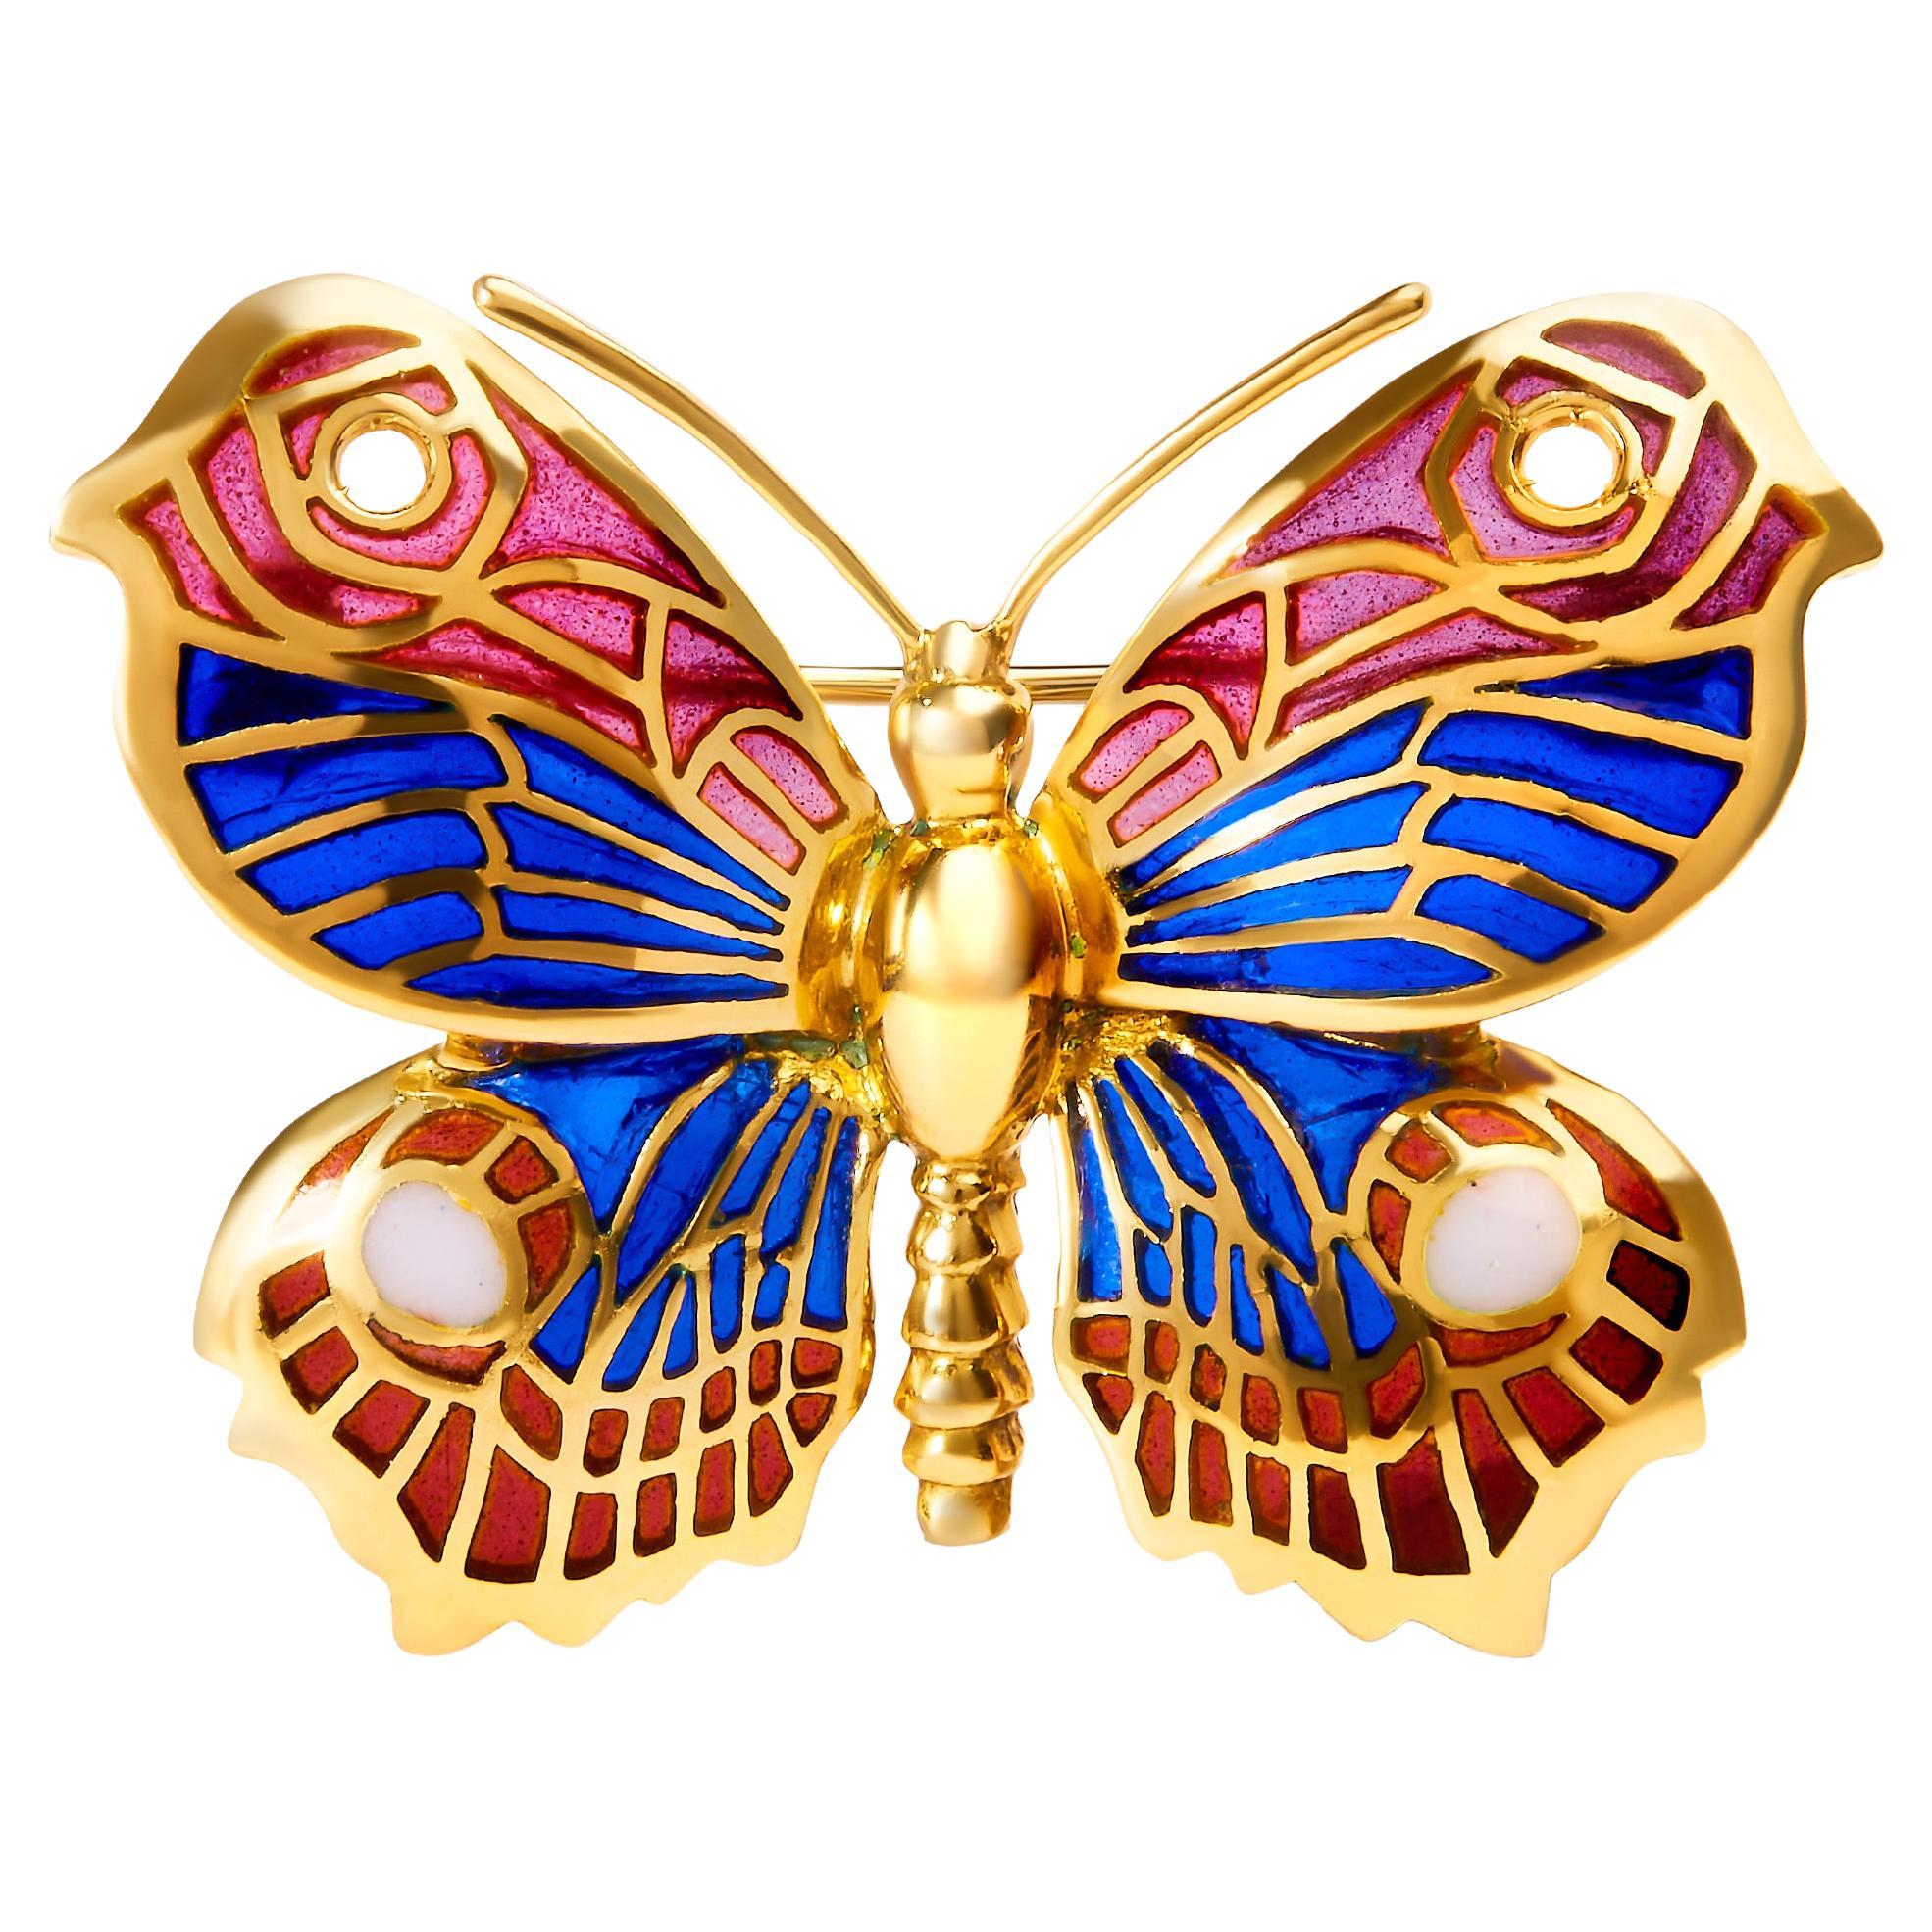 18K Yellow Gold Red, Blue, and White Enameled Butterfly Brooch Pin